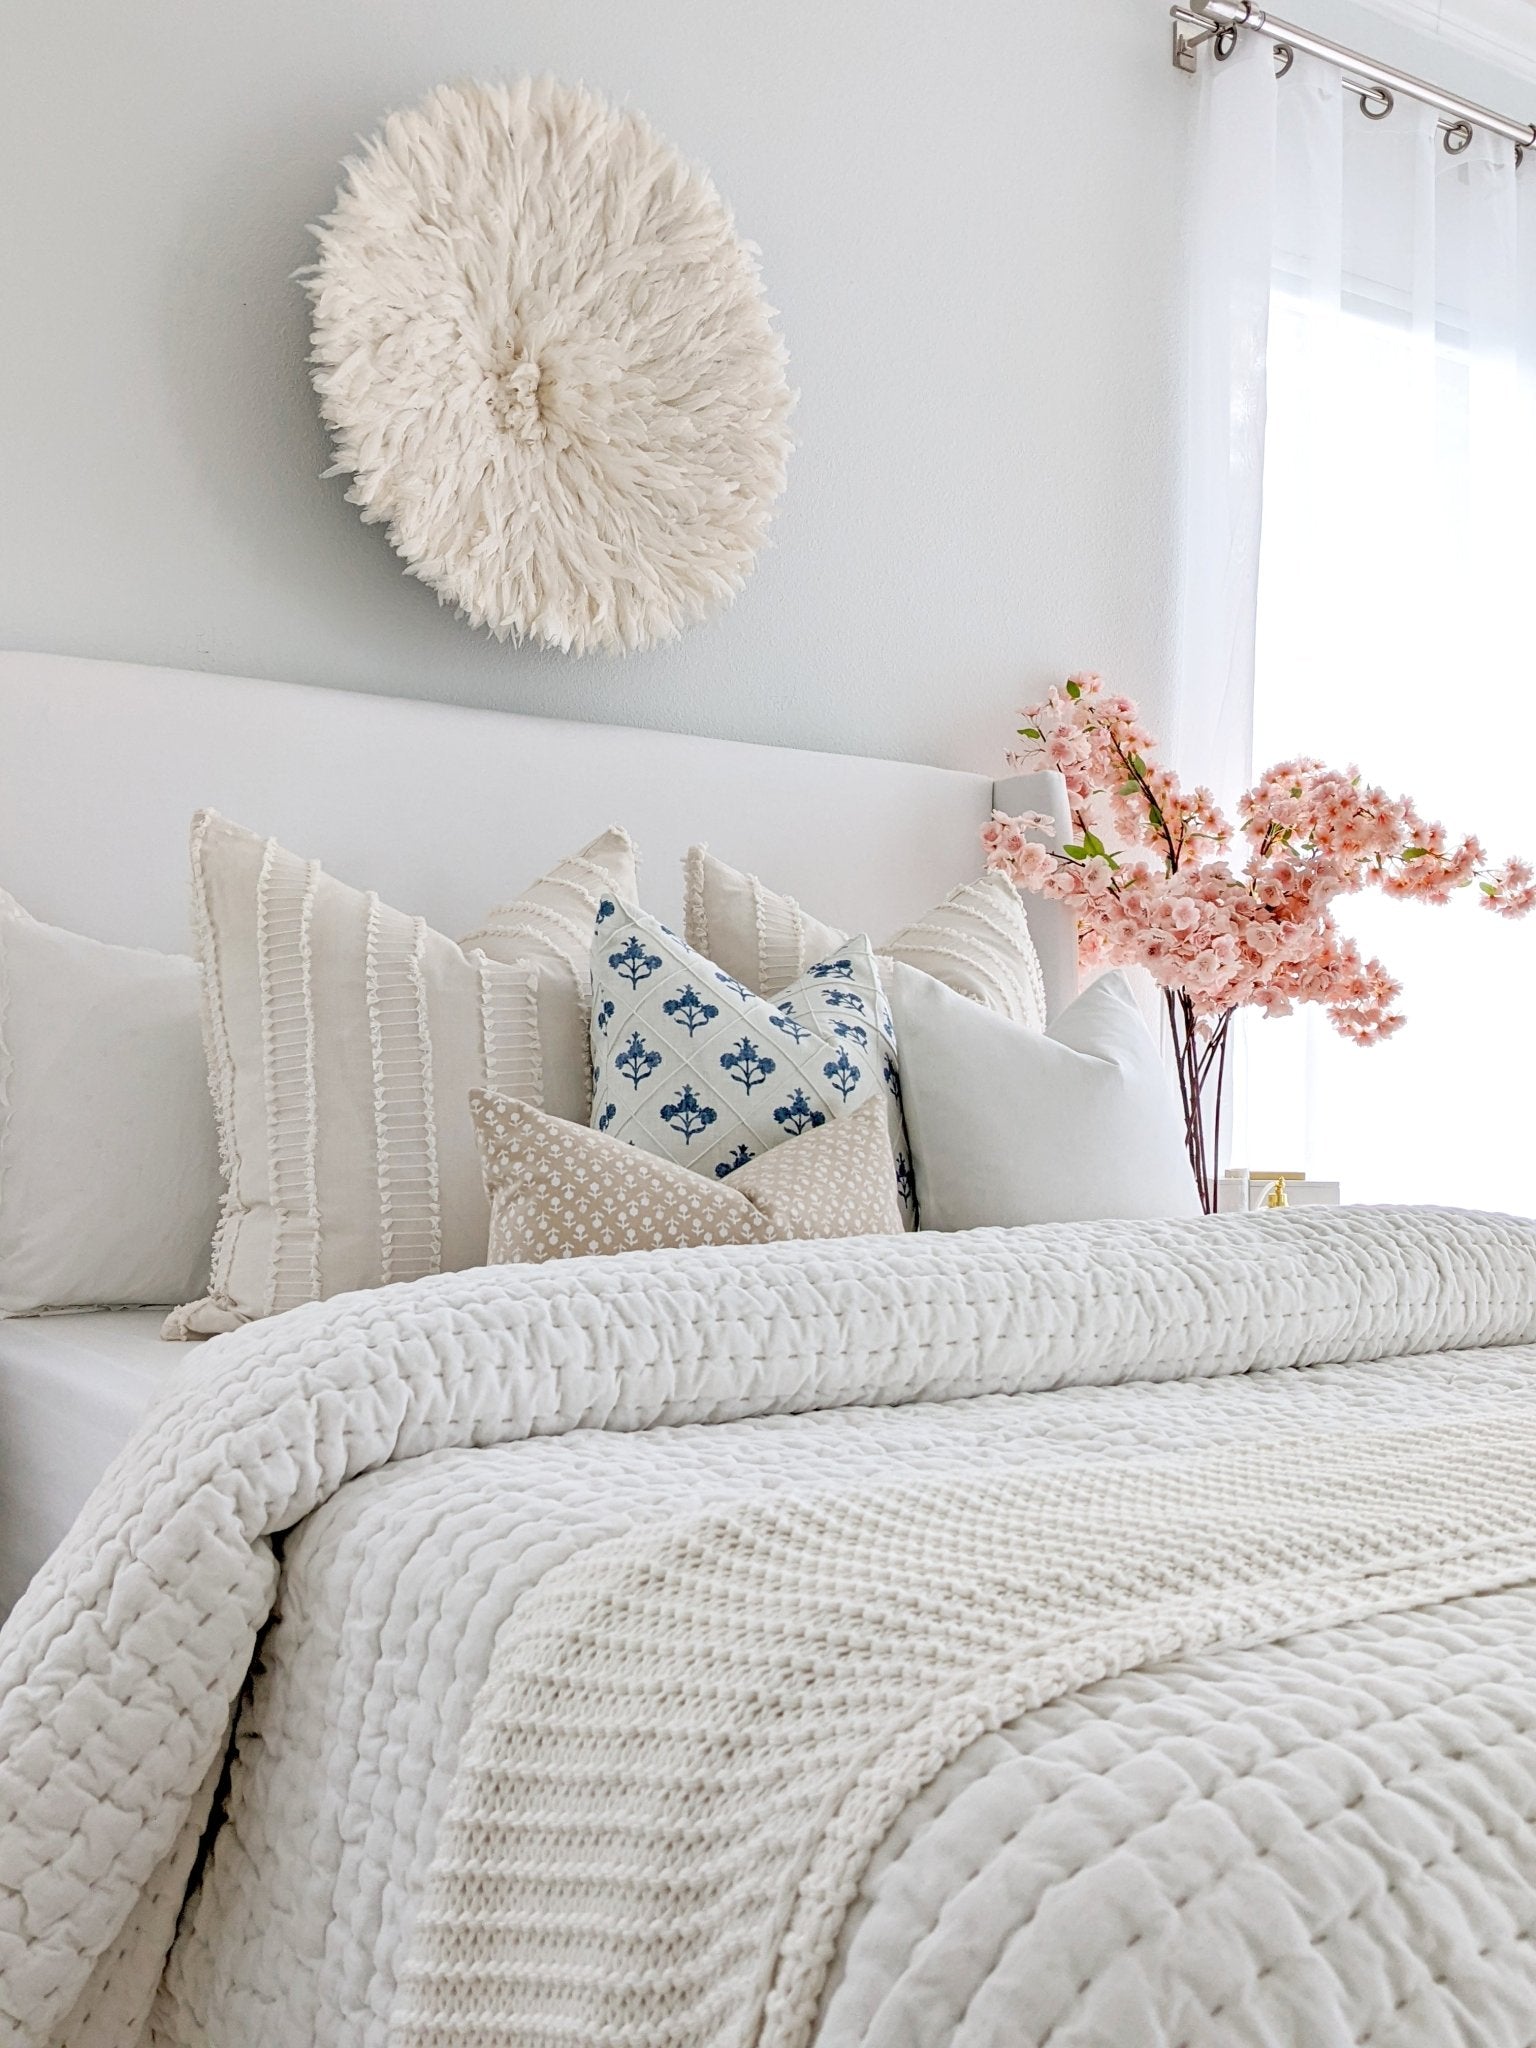 Love white linens with lots of pillows - From Isla #bedroominspo